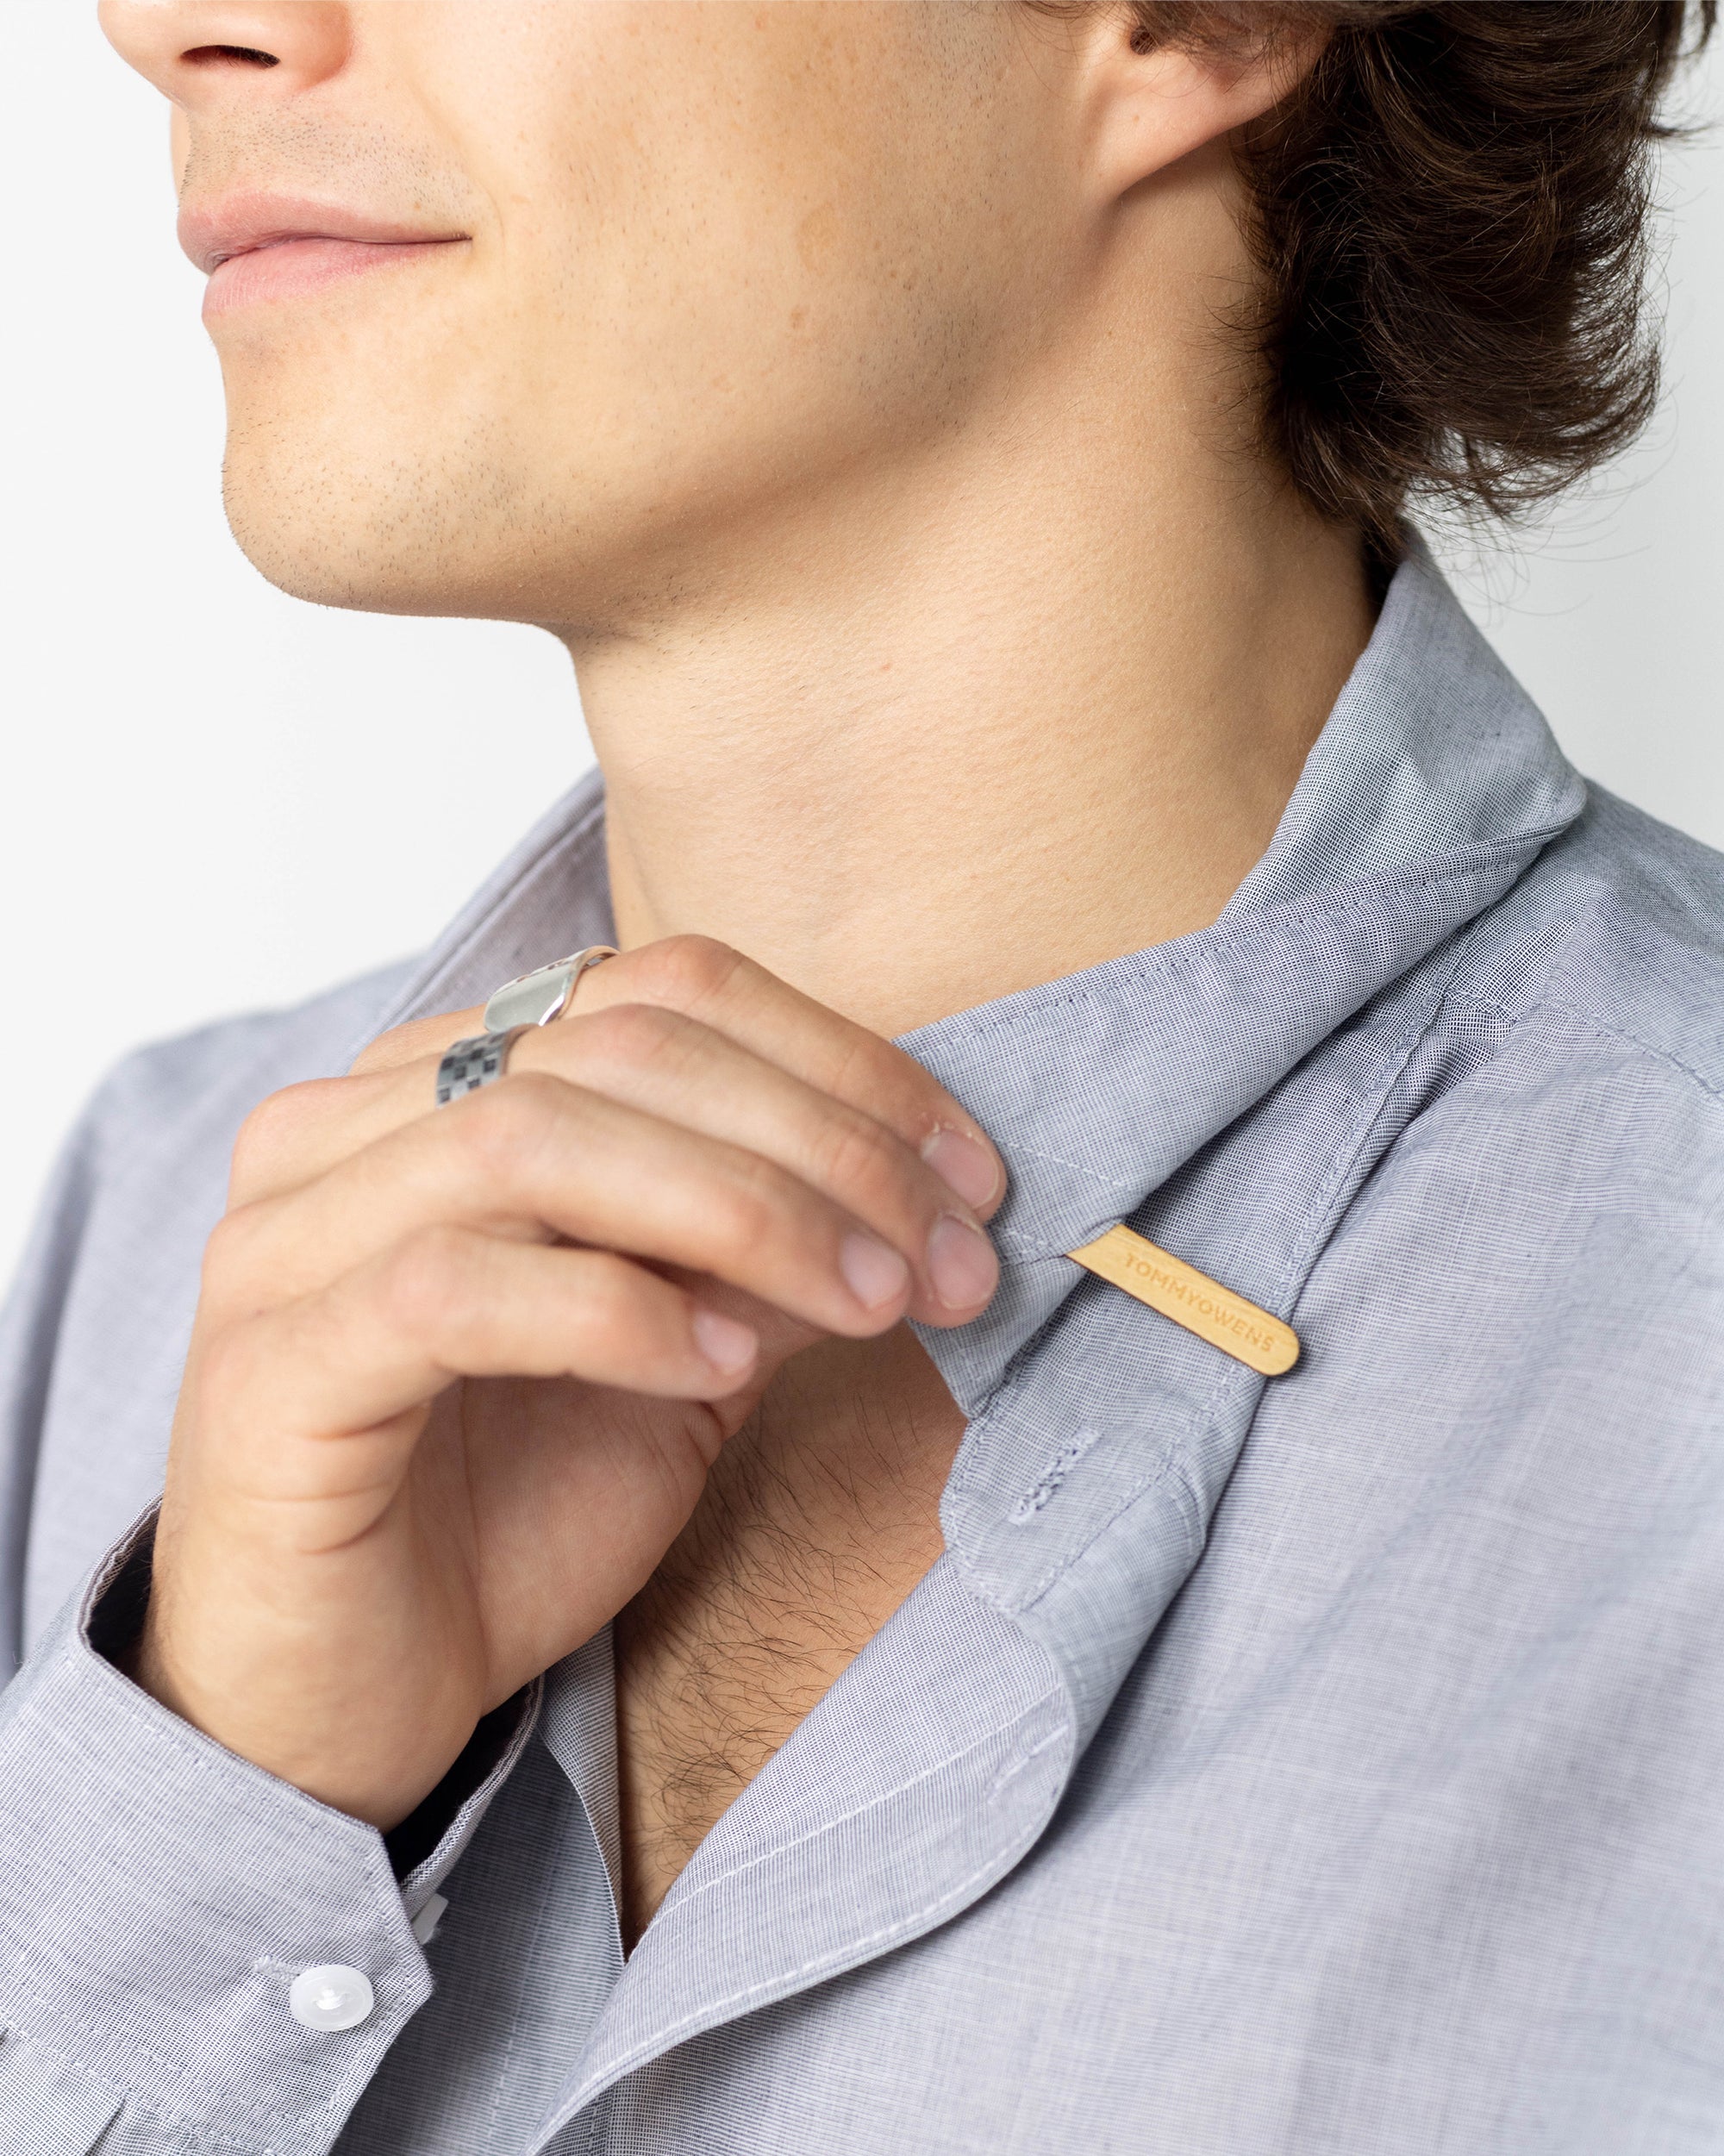 maple wood collar stays for dress shirts